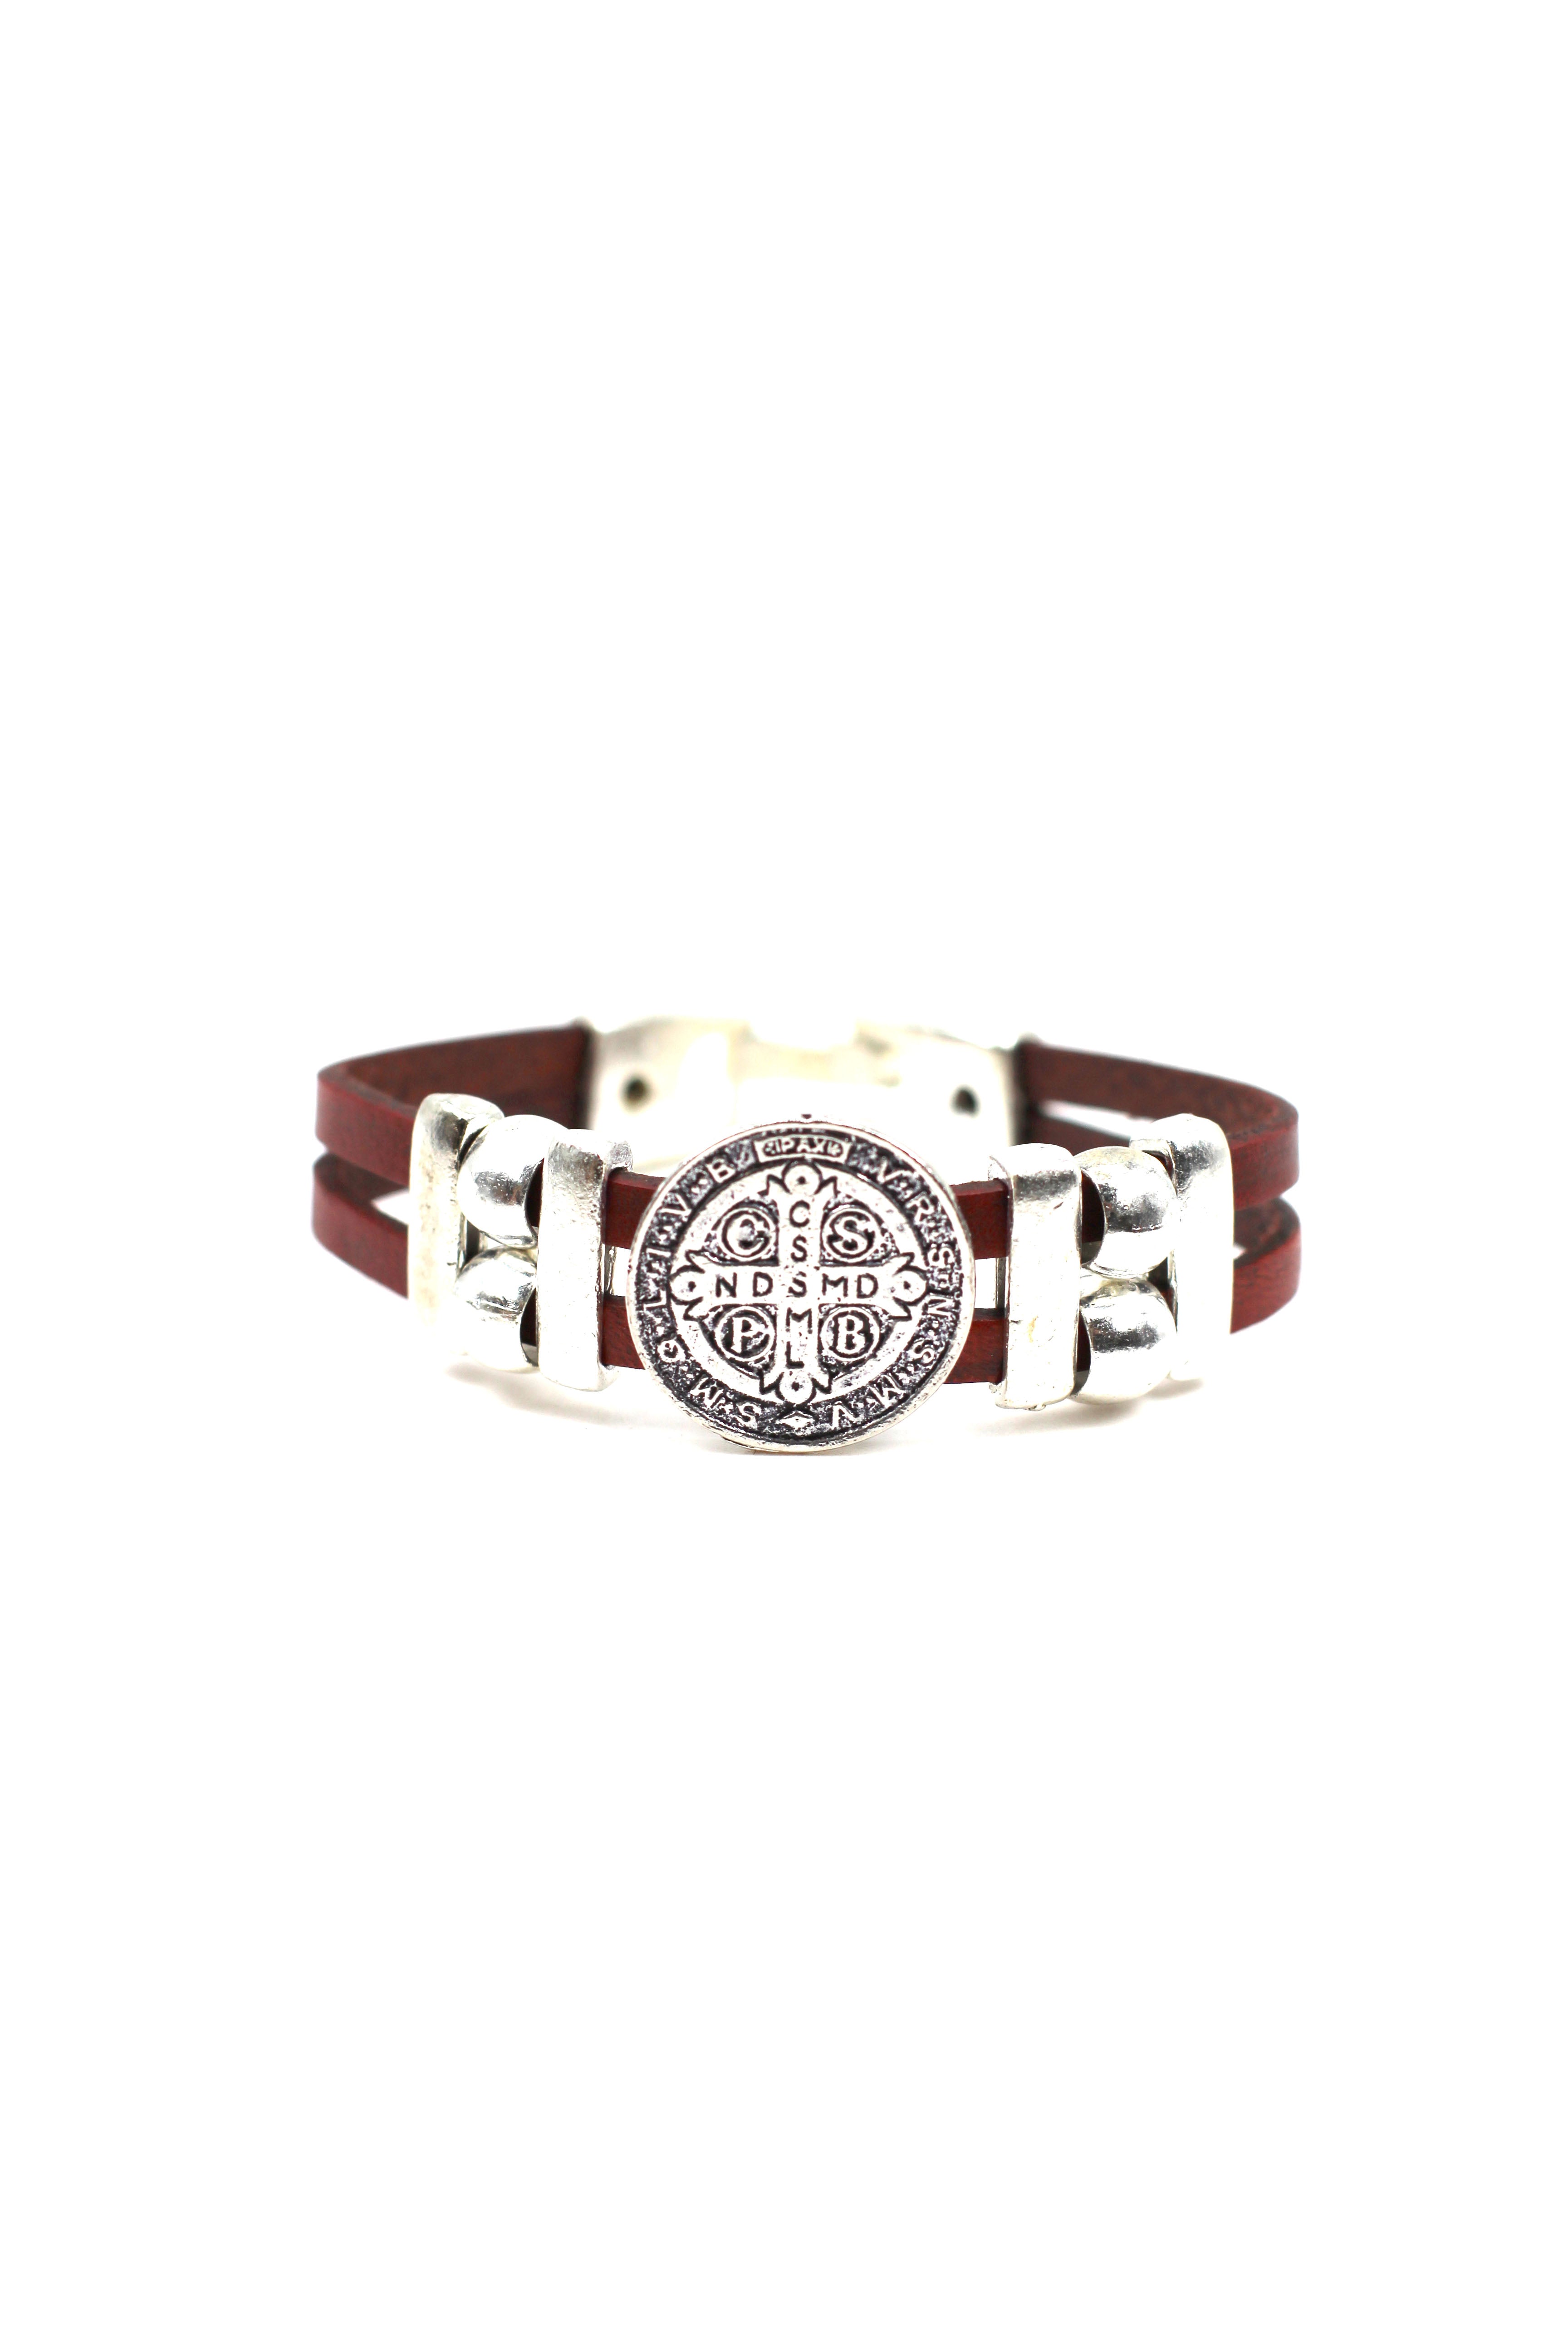 Vintage St. Benedict bracelet handmade jewelry with Double Leather Straps by Graciela's Collection